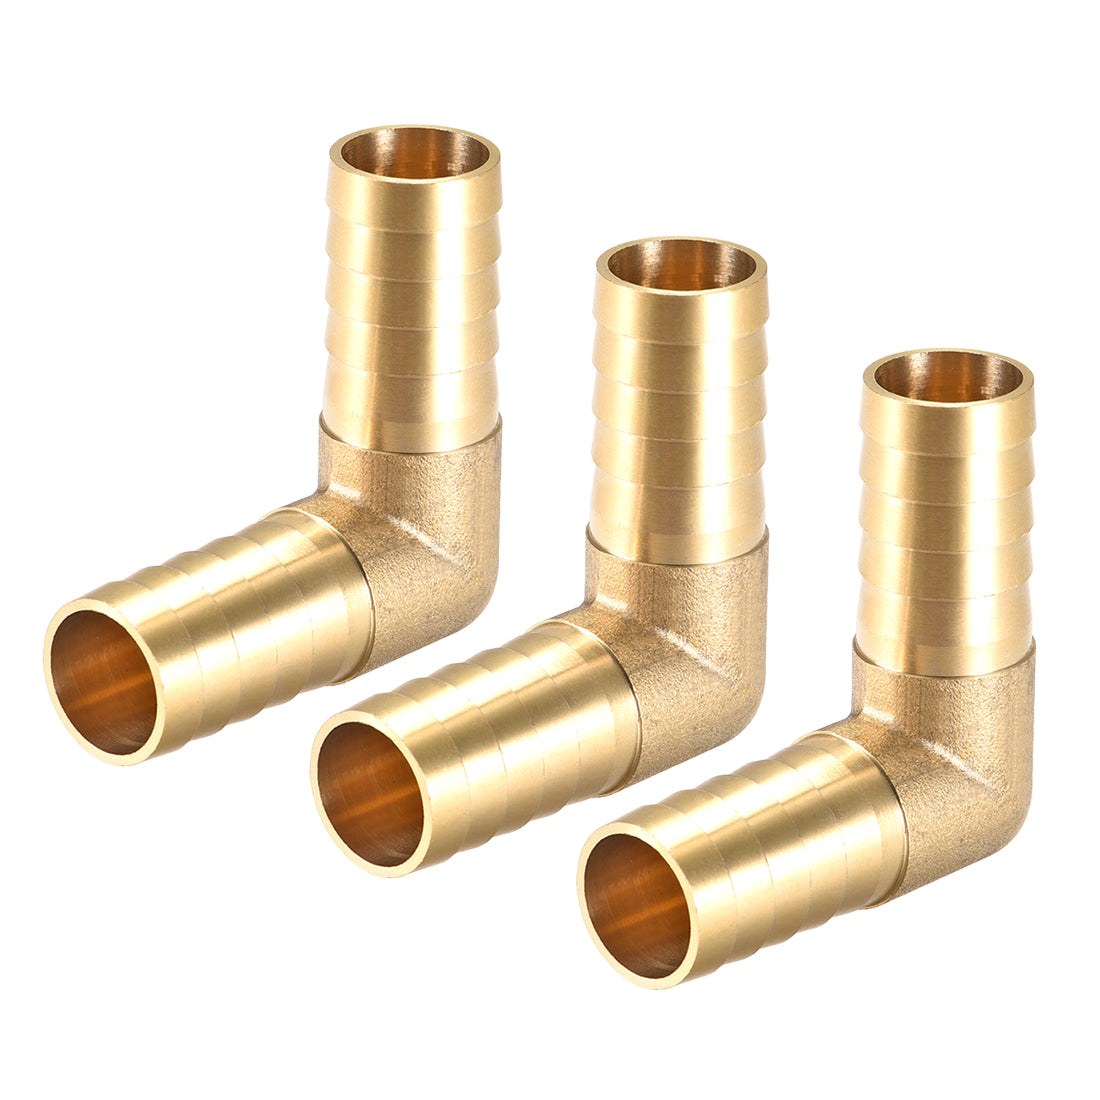 Uxcell Uxcell 16mm Barb Brass Hose Fitting 90 Degree Elbow Pipe Connector Coupler Tubing 3pcs